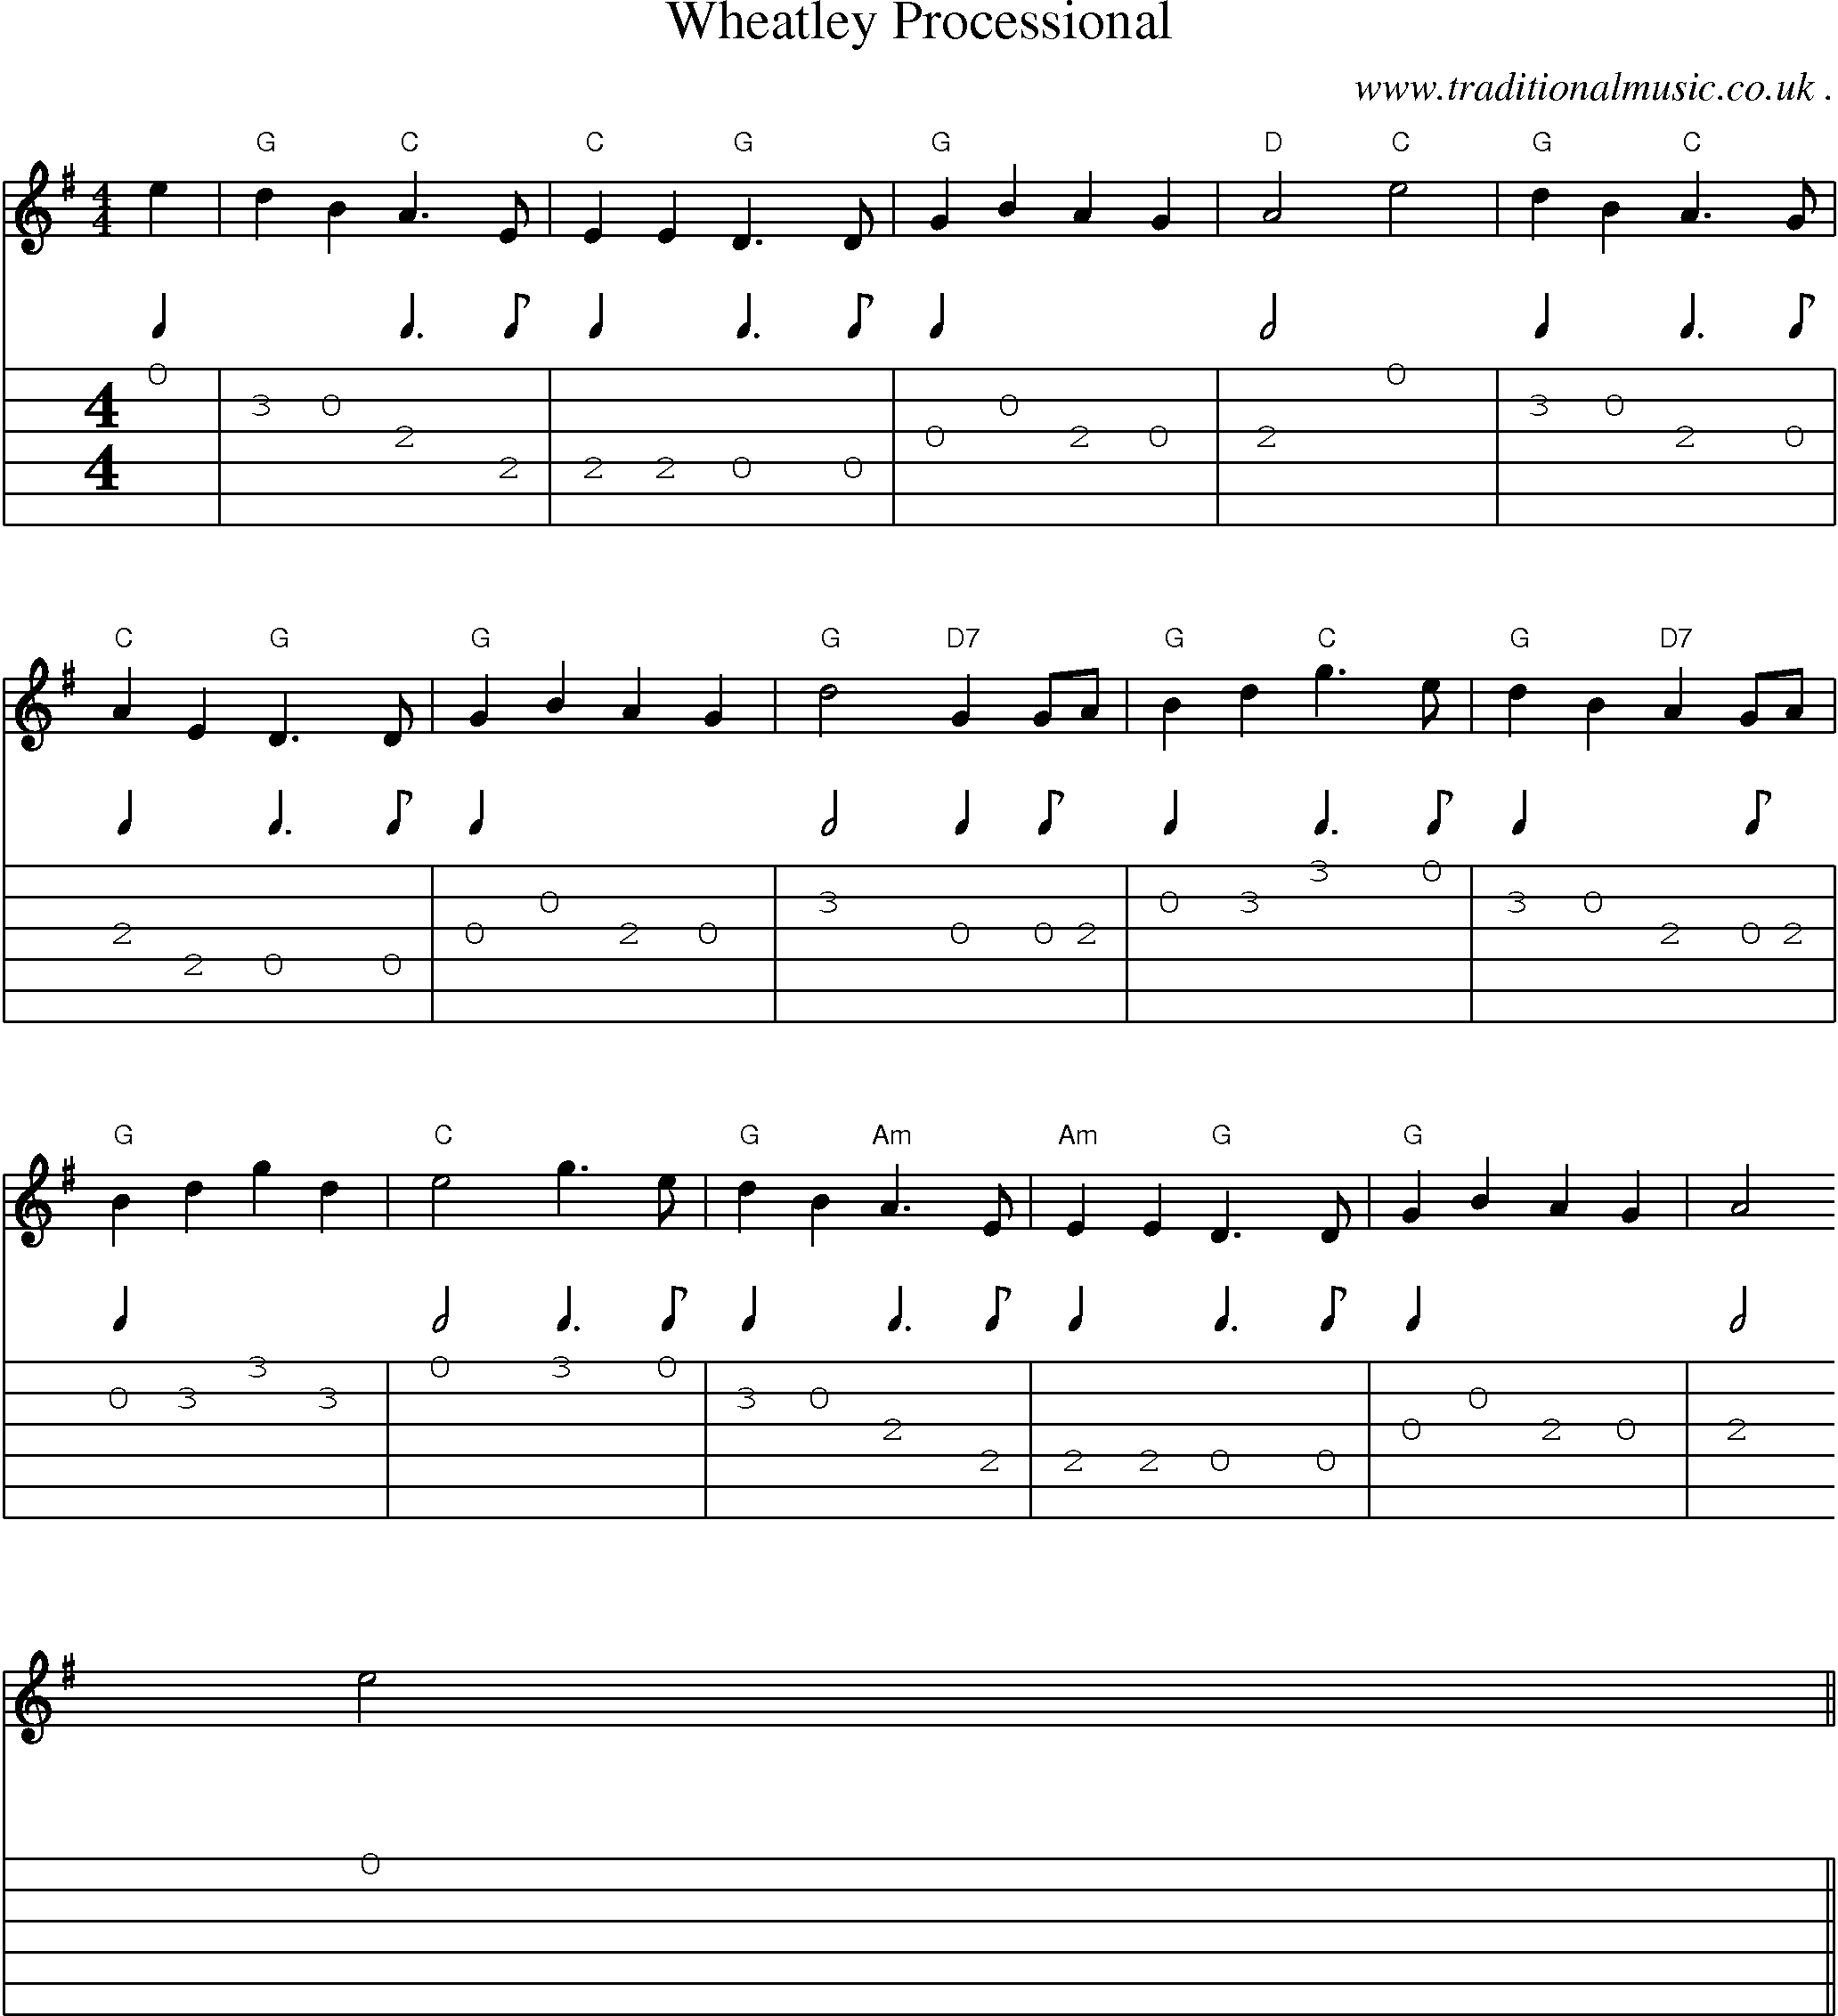 Sheet-Music and Guitar Tabs for Wheatley Processional